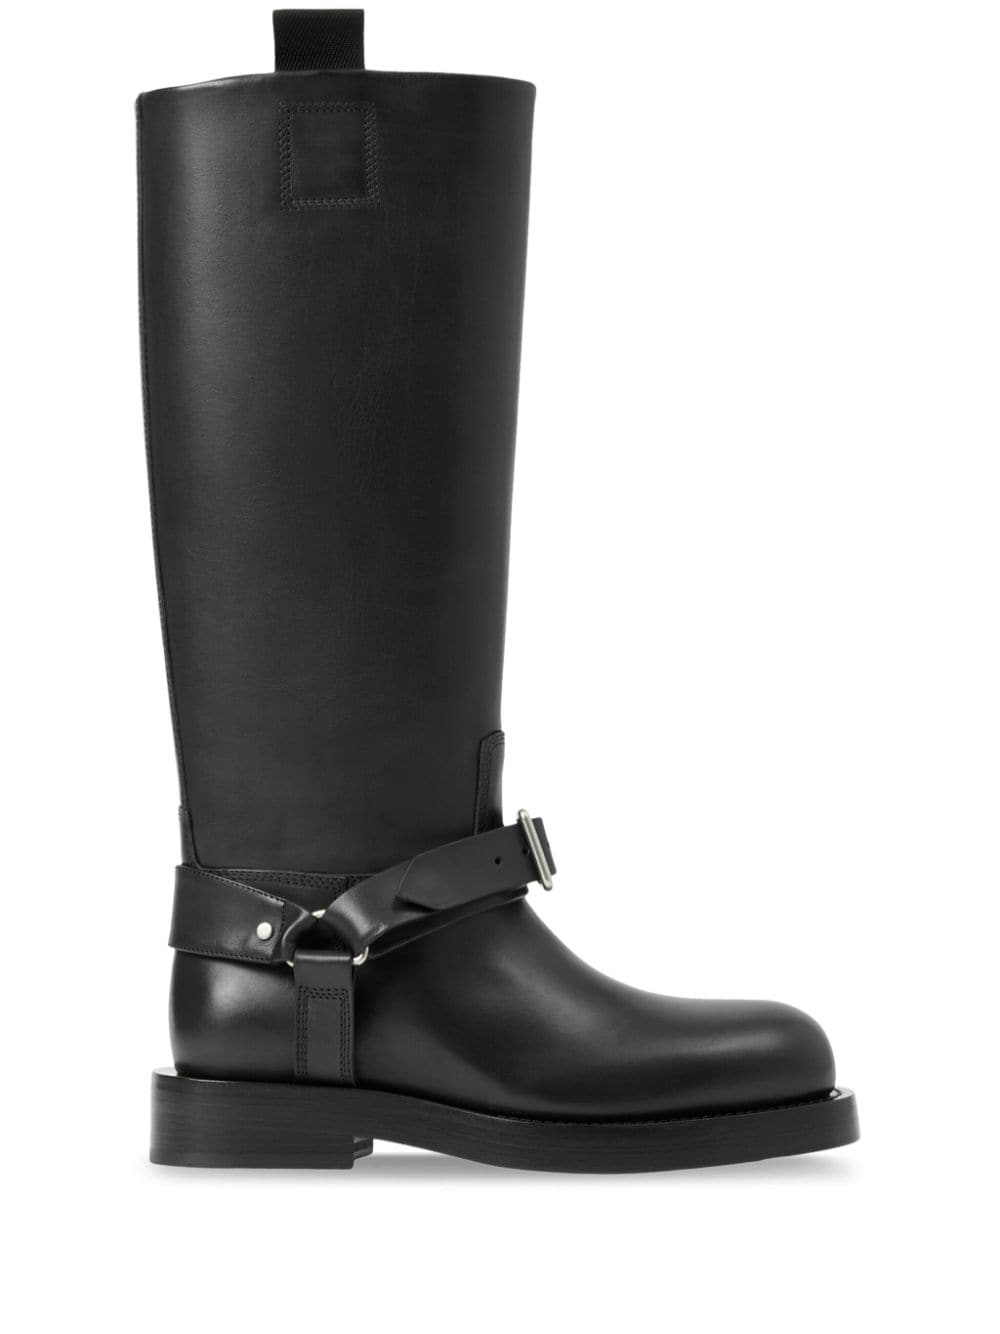 Burberry Saddle knee-high leather boots - Black von Burberry